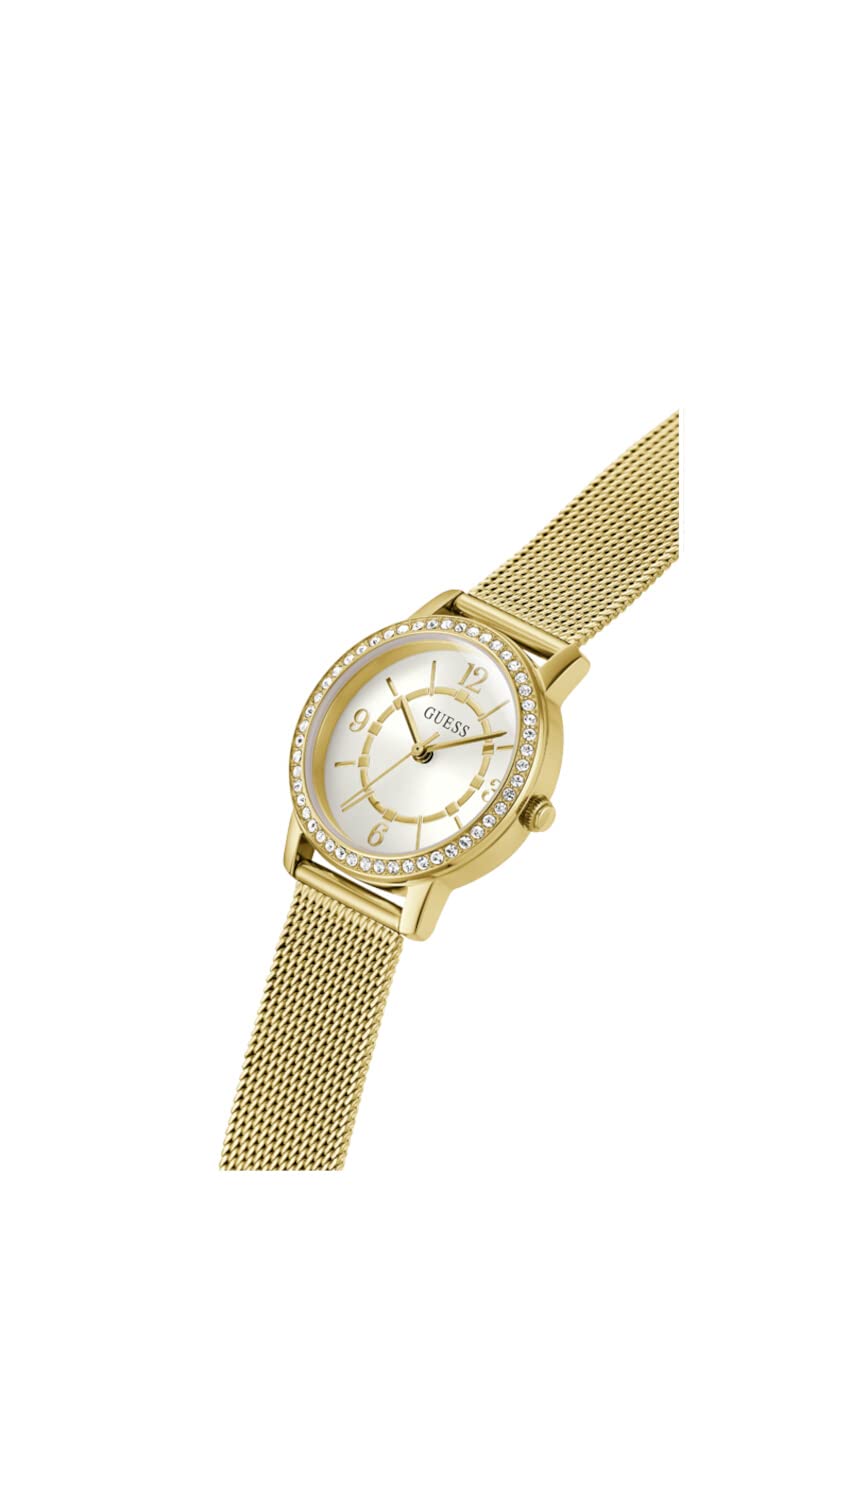 GUESS Ladies 28mm Watch - Gold Tone Strap White Dial Gold Tone Case